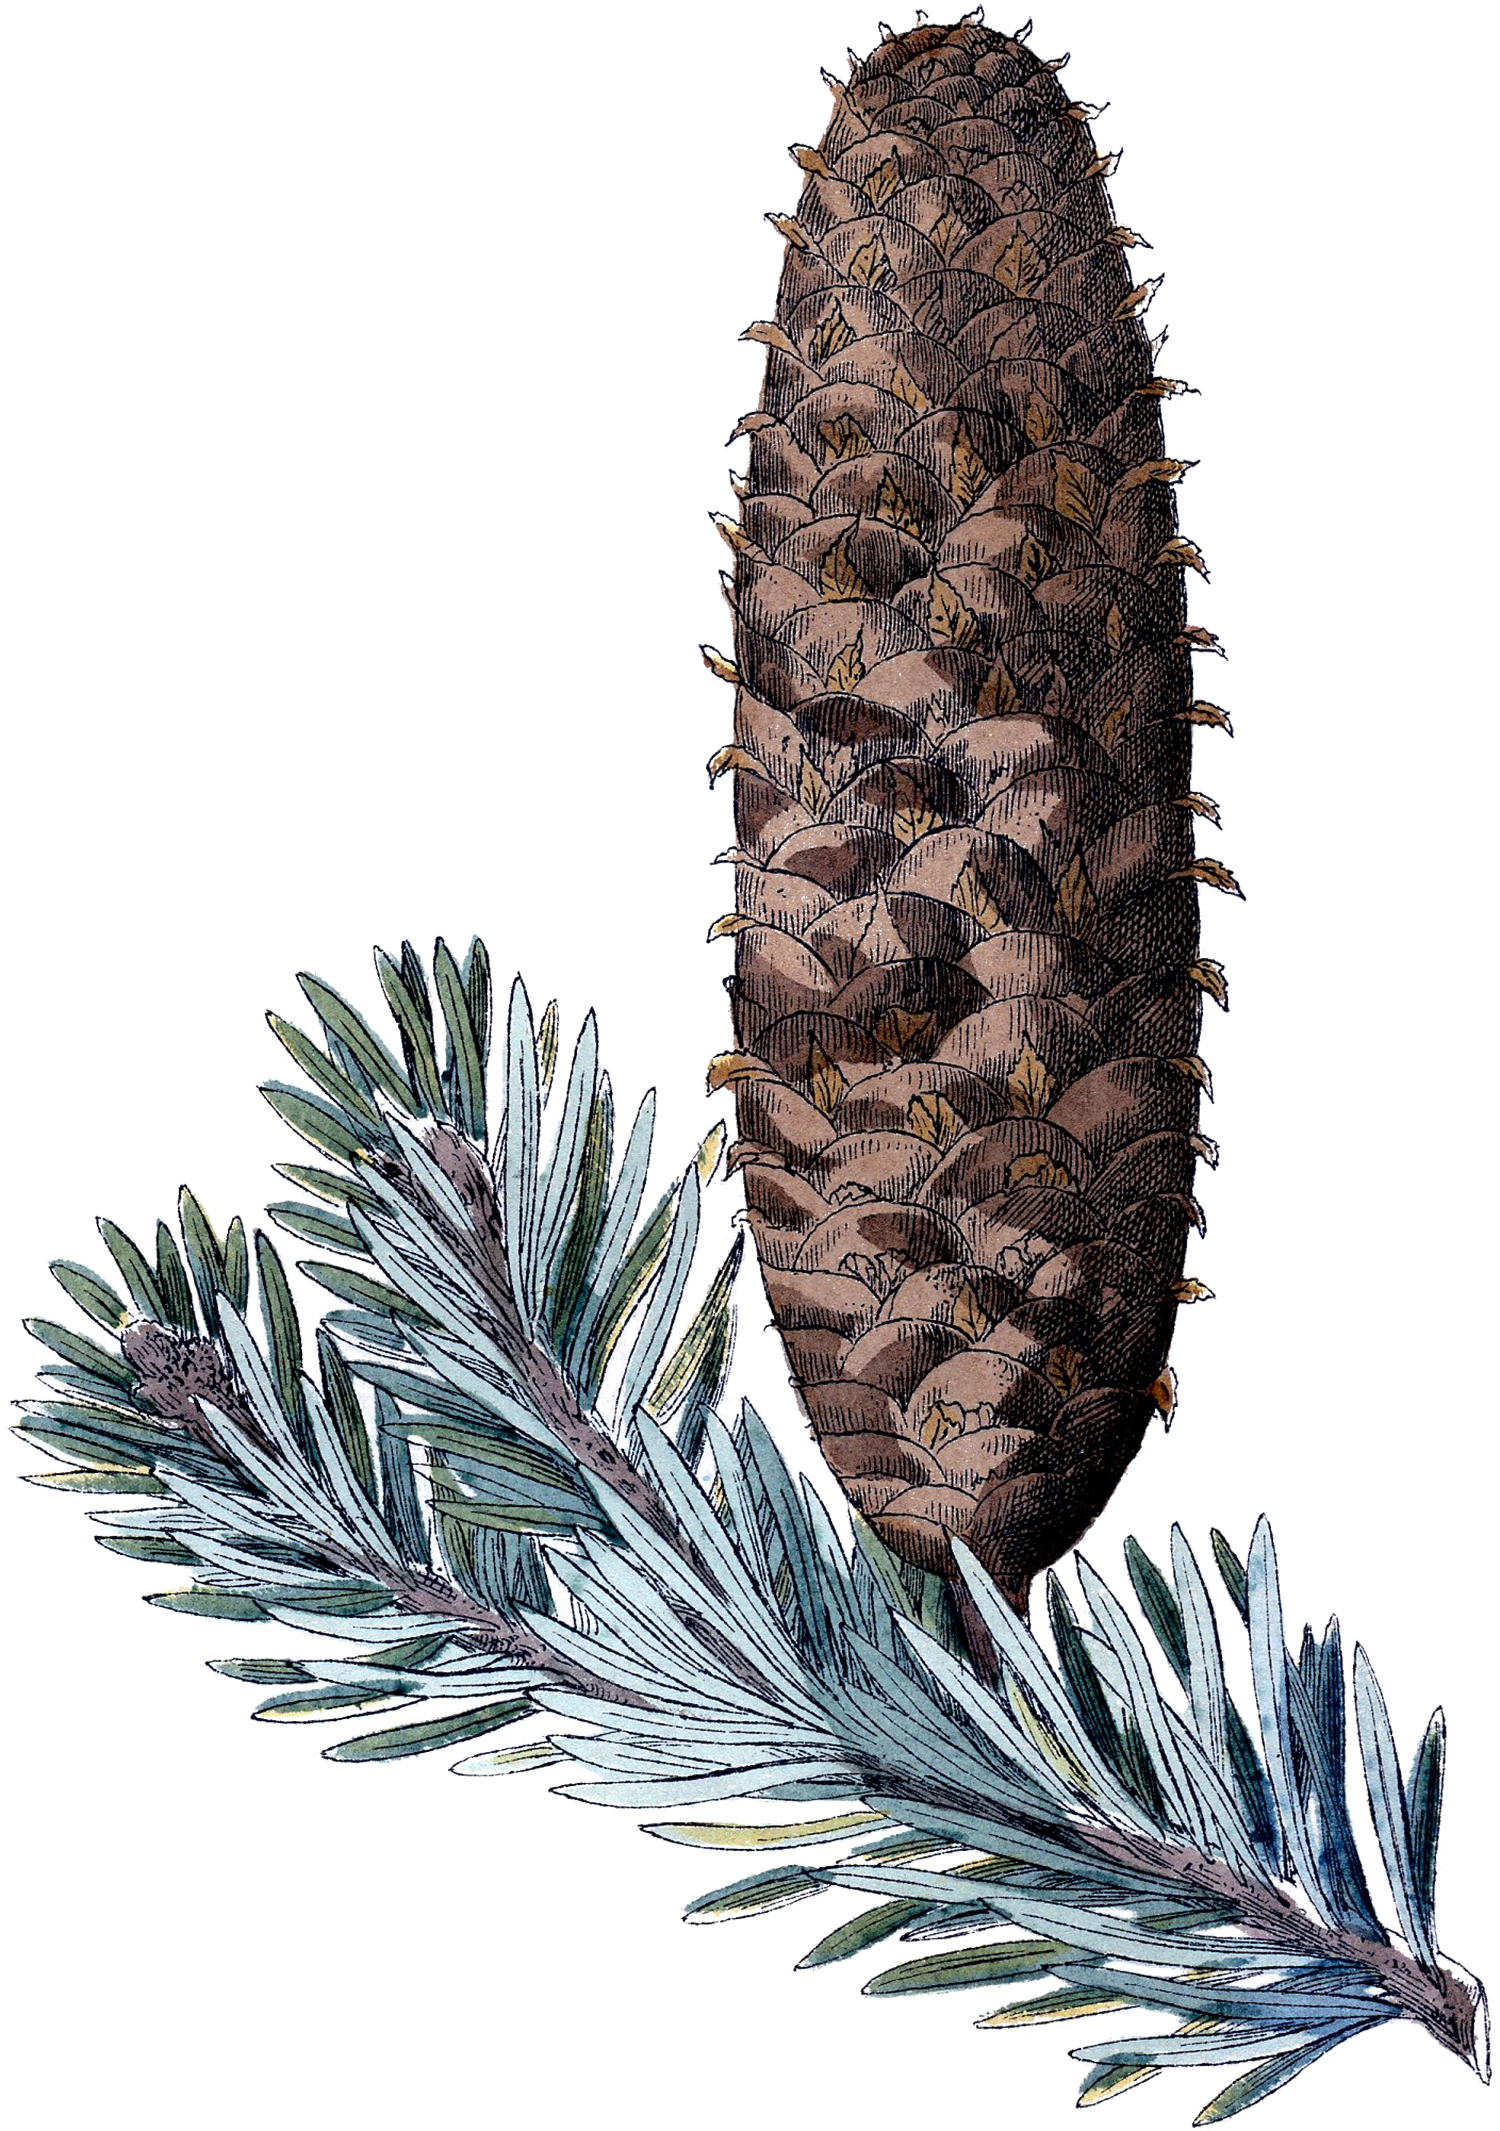 Eastern White pine cones - Stock Image - B500/0200 - Science Photo Library